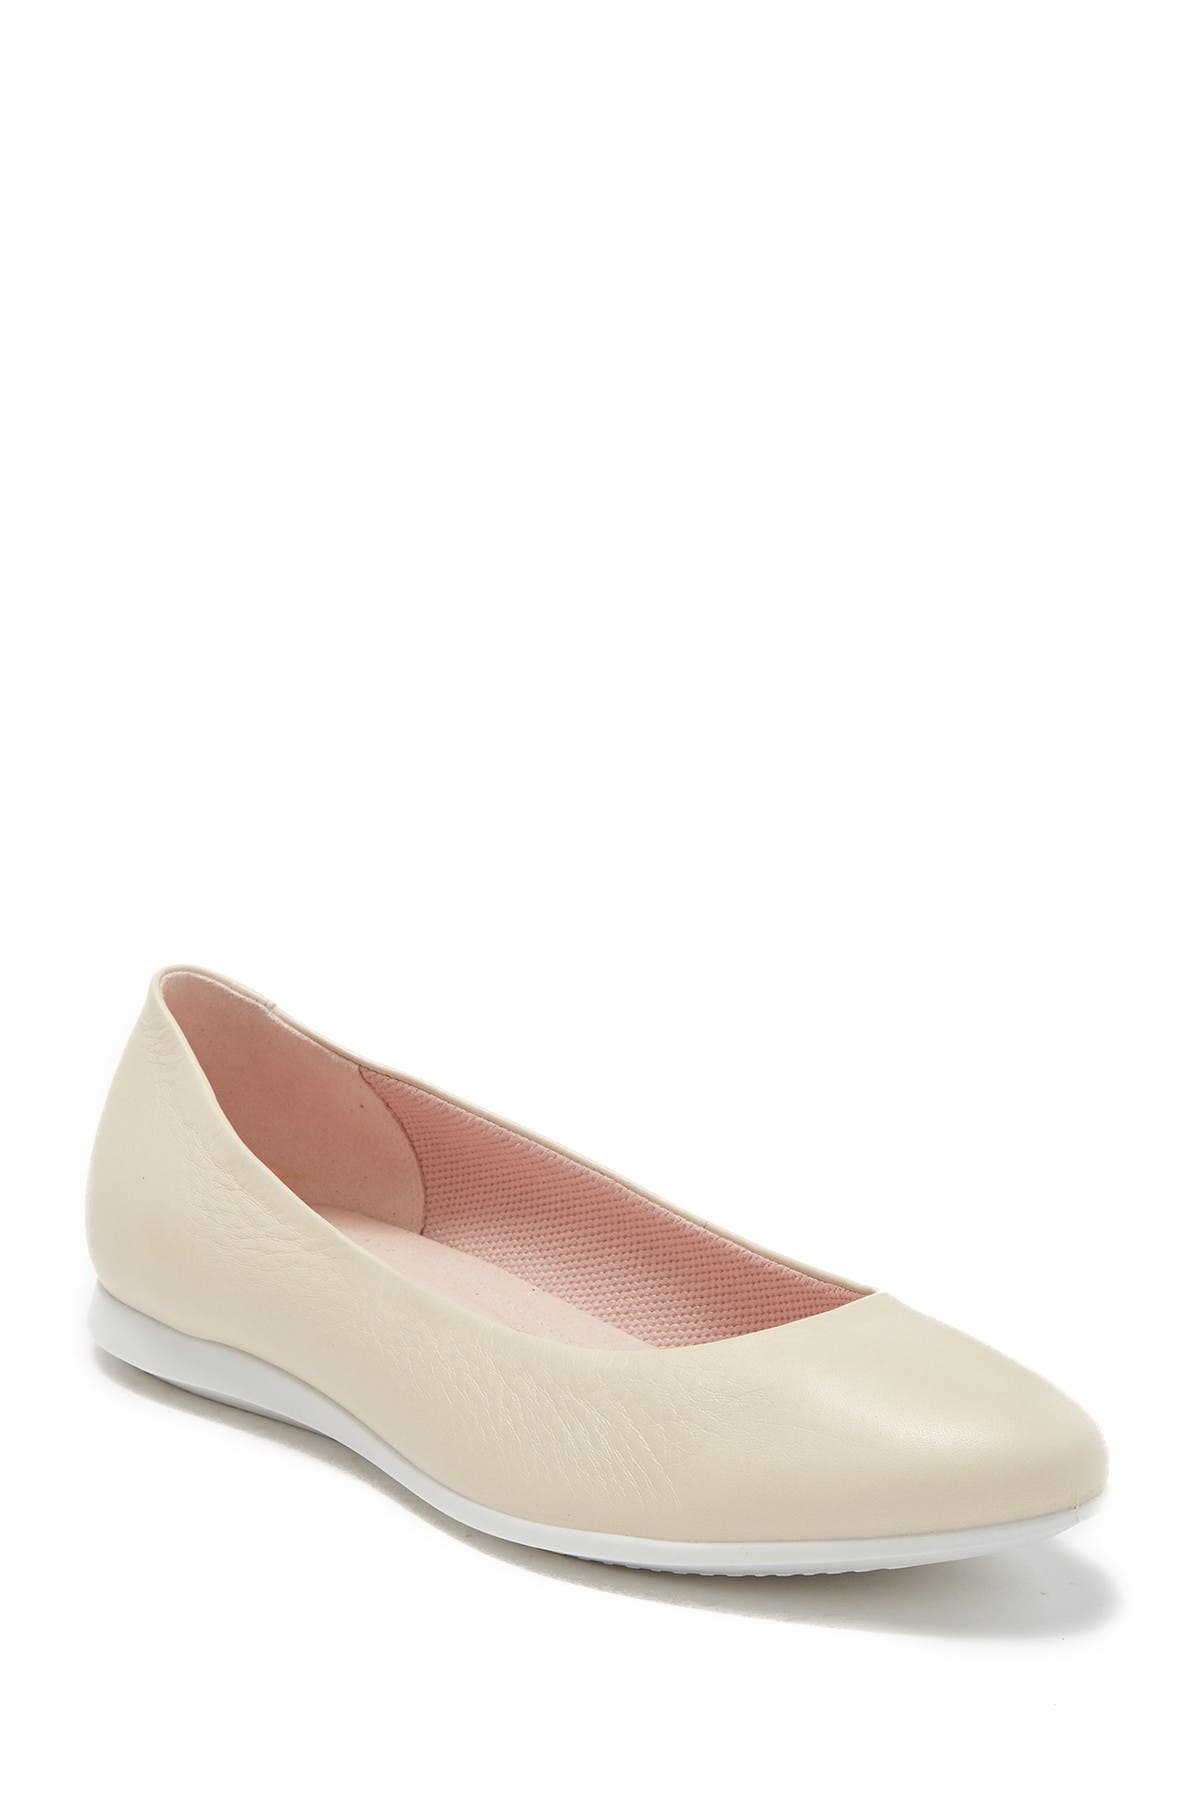 ECCO | Touch Leather Ballerina 2.0 Flat 